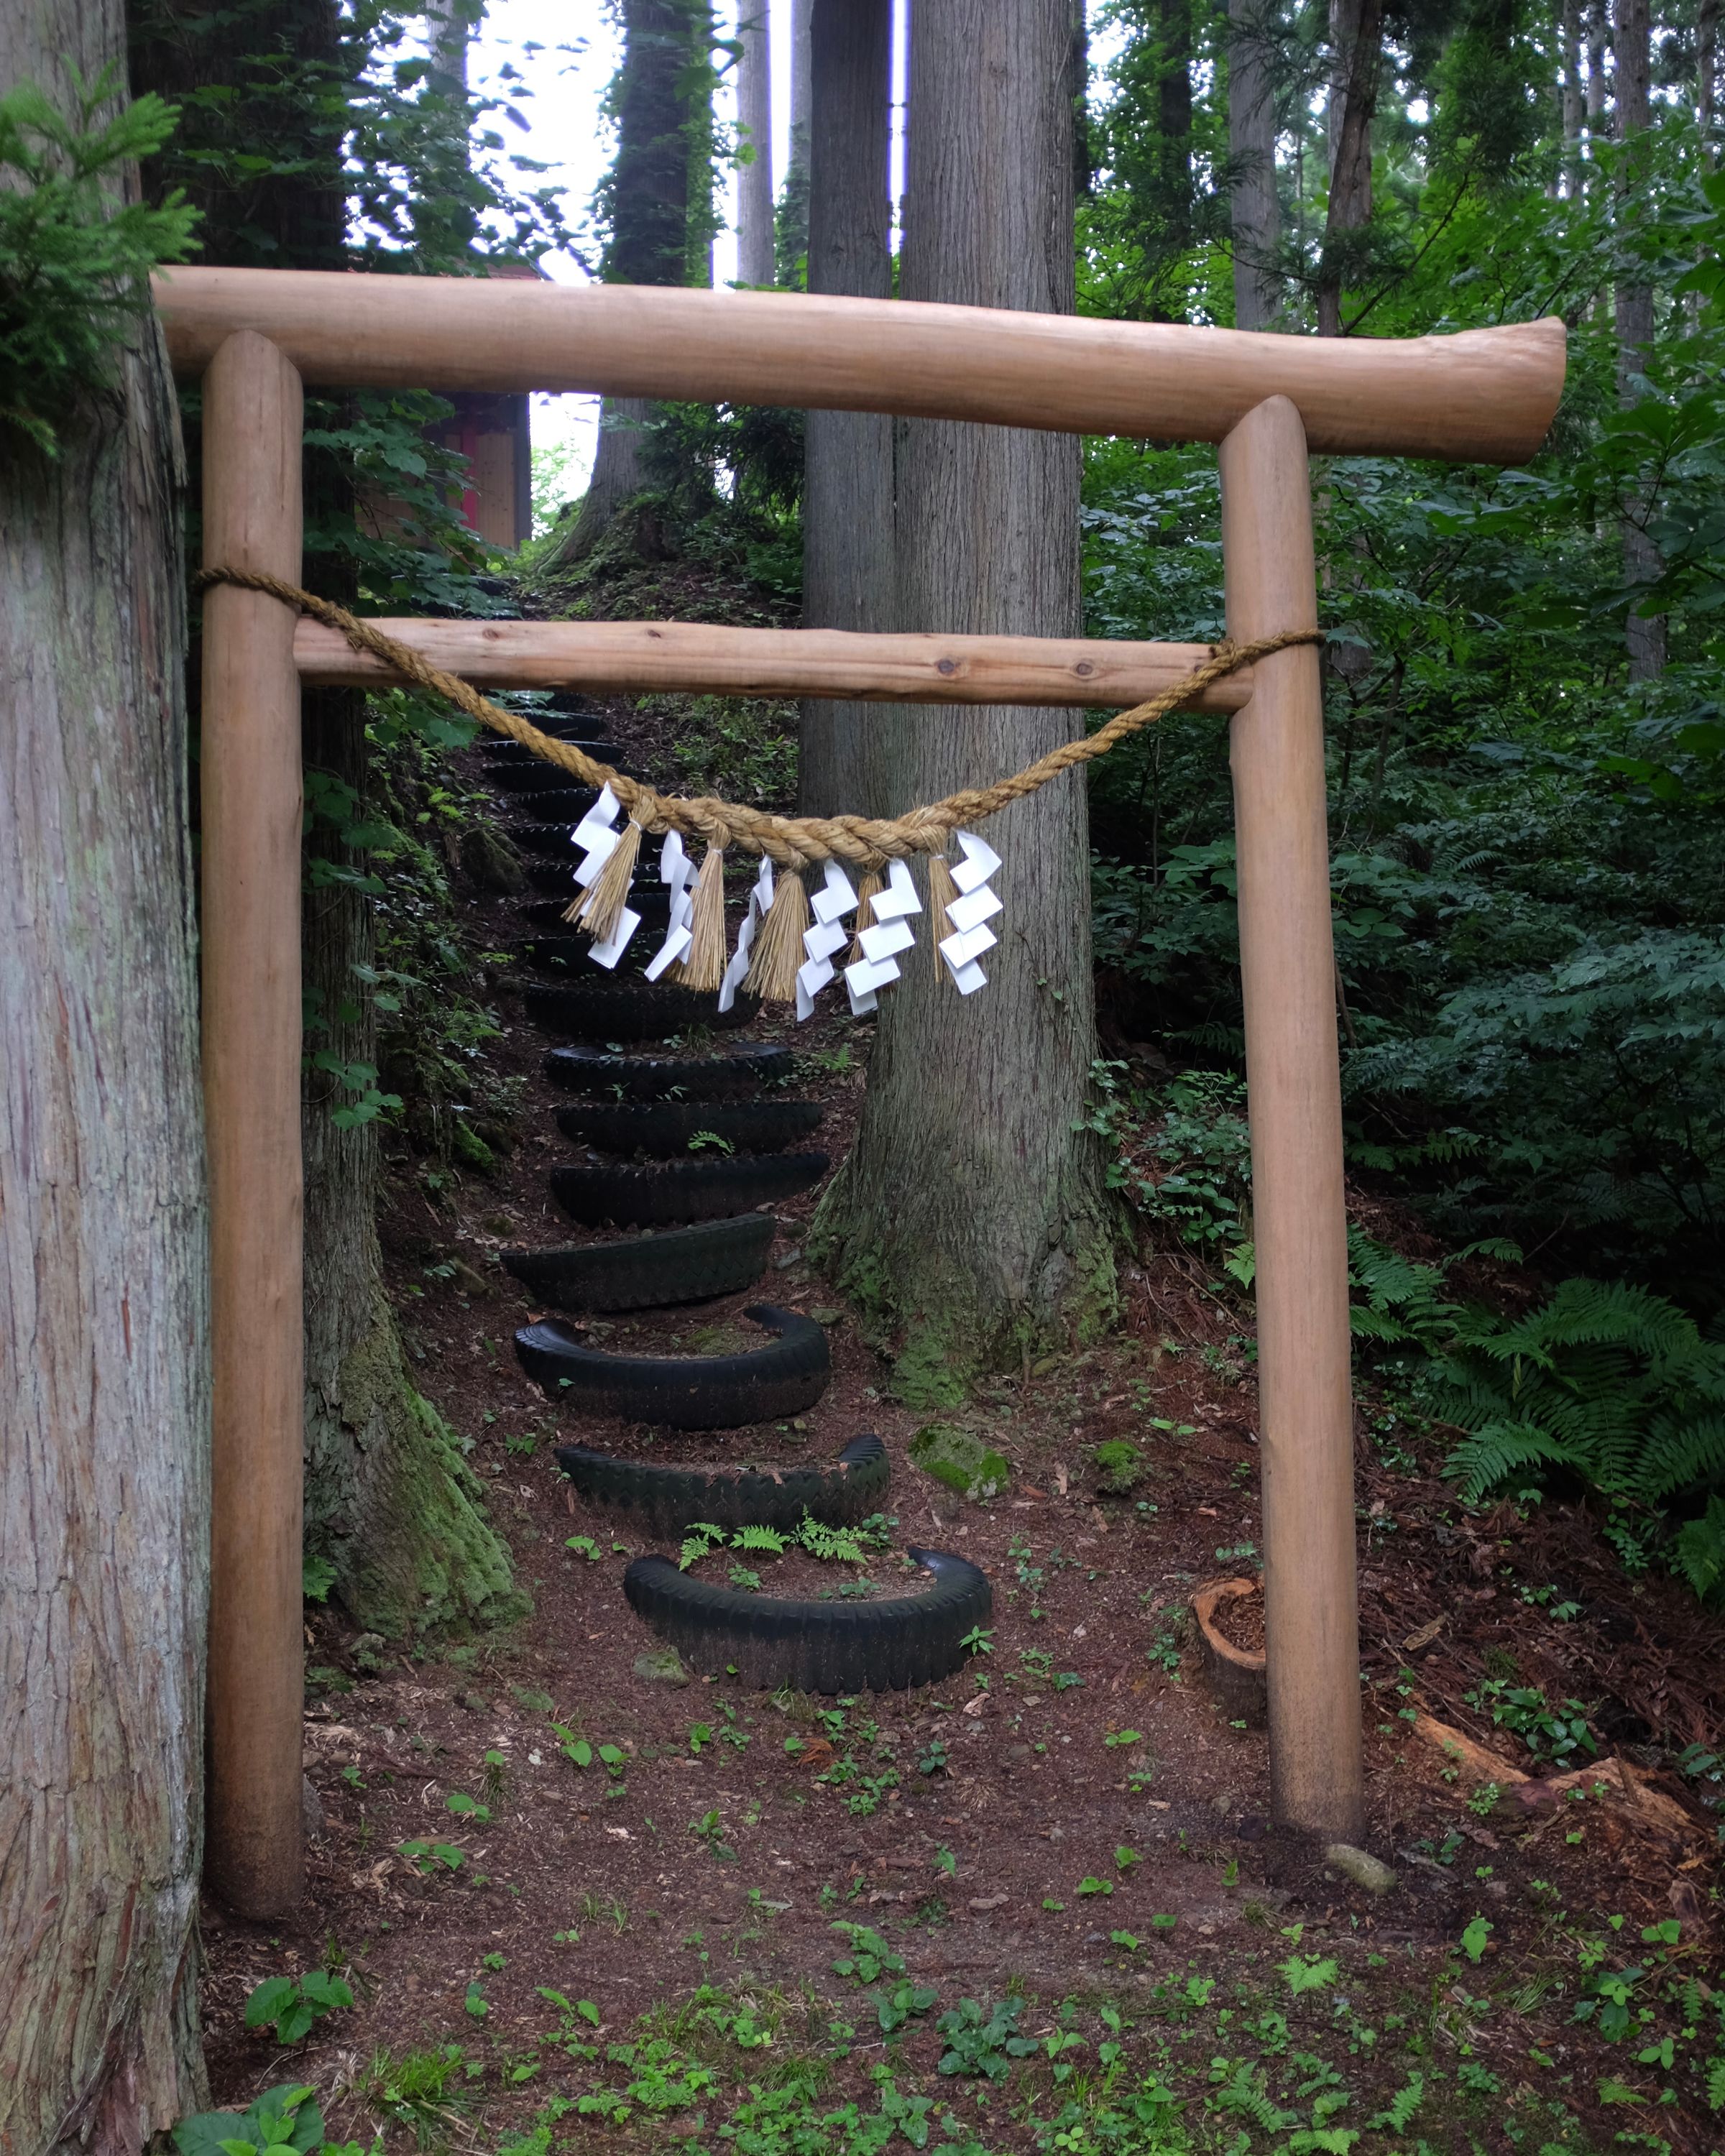 Steps made of car tyres lead up a hill from the gate of a shrine.